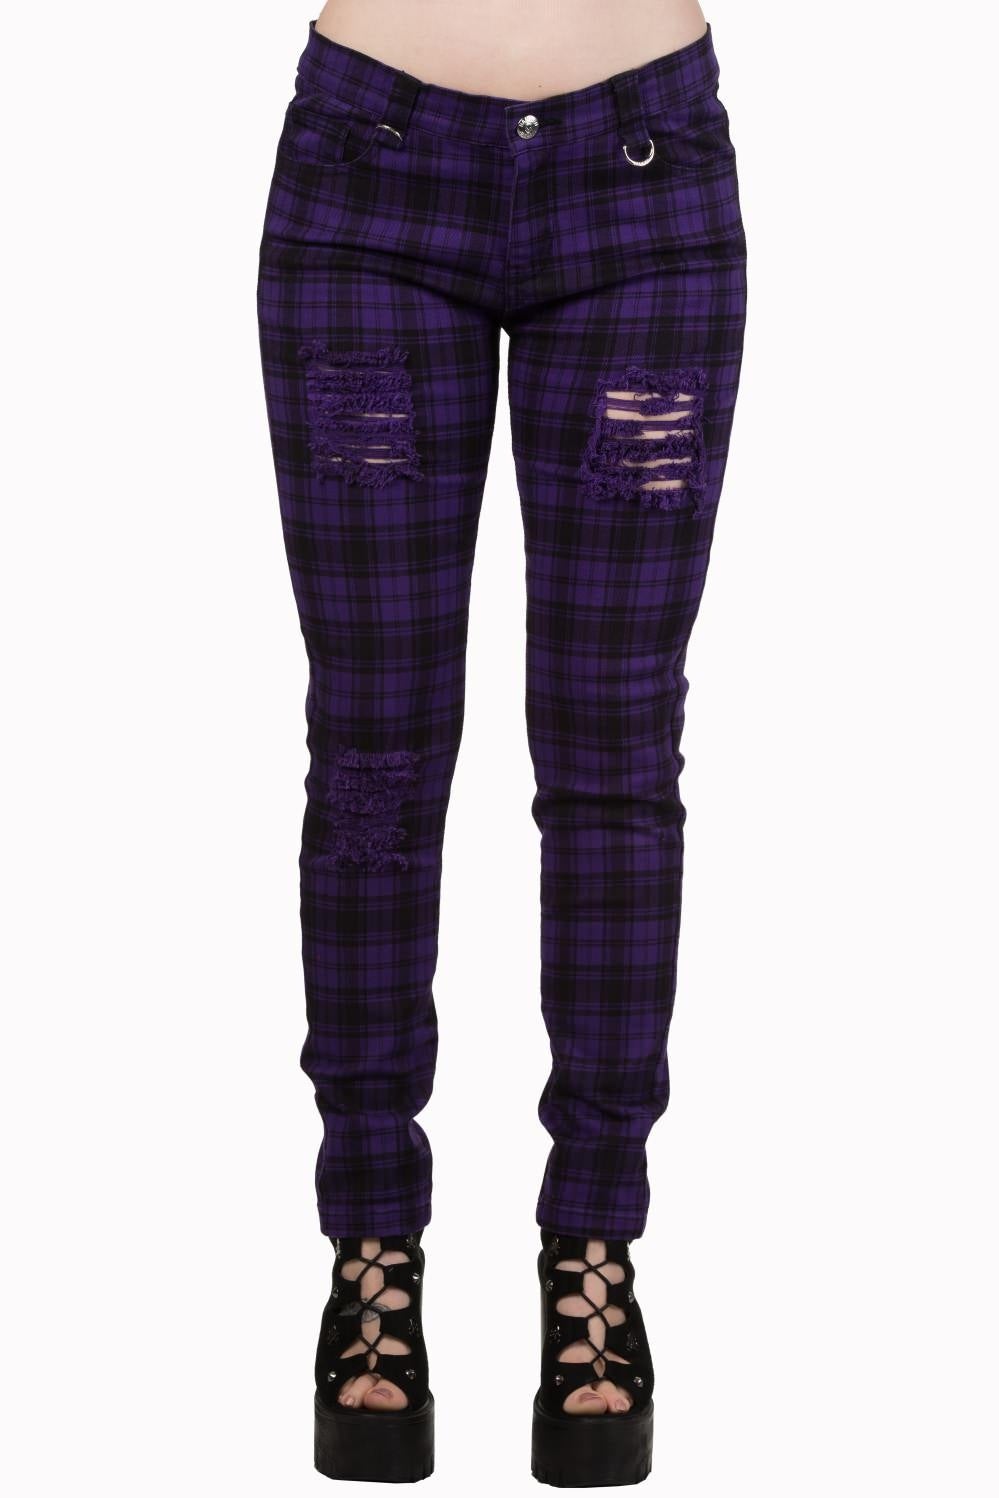 Purple tartan check trousers low rise with rips. 